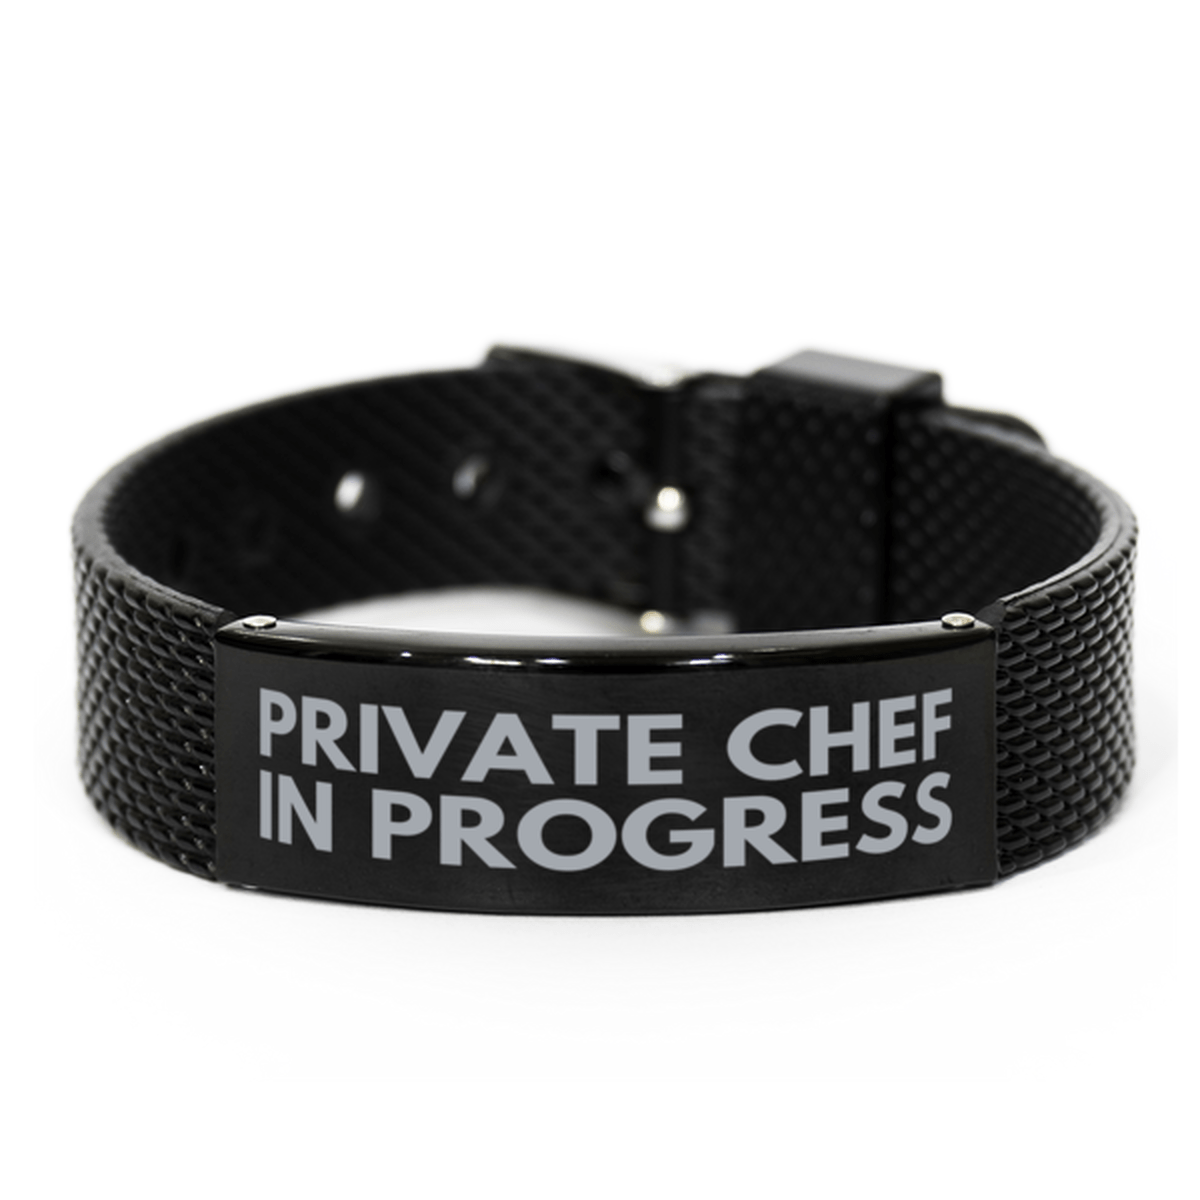 Inspirational Private Chef Black Shark Mesh Bracelet, Private Chef In Progress, Best Graduation Gifts for Students